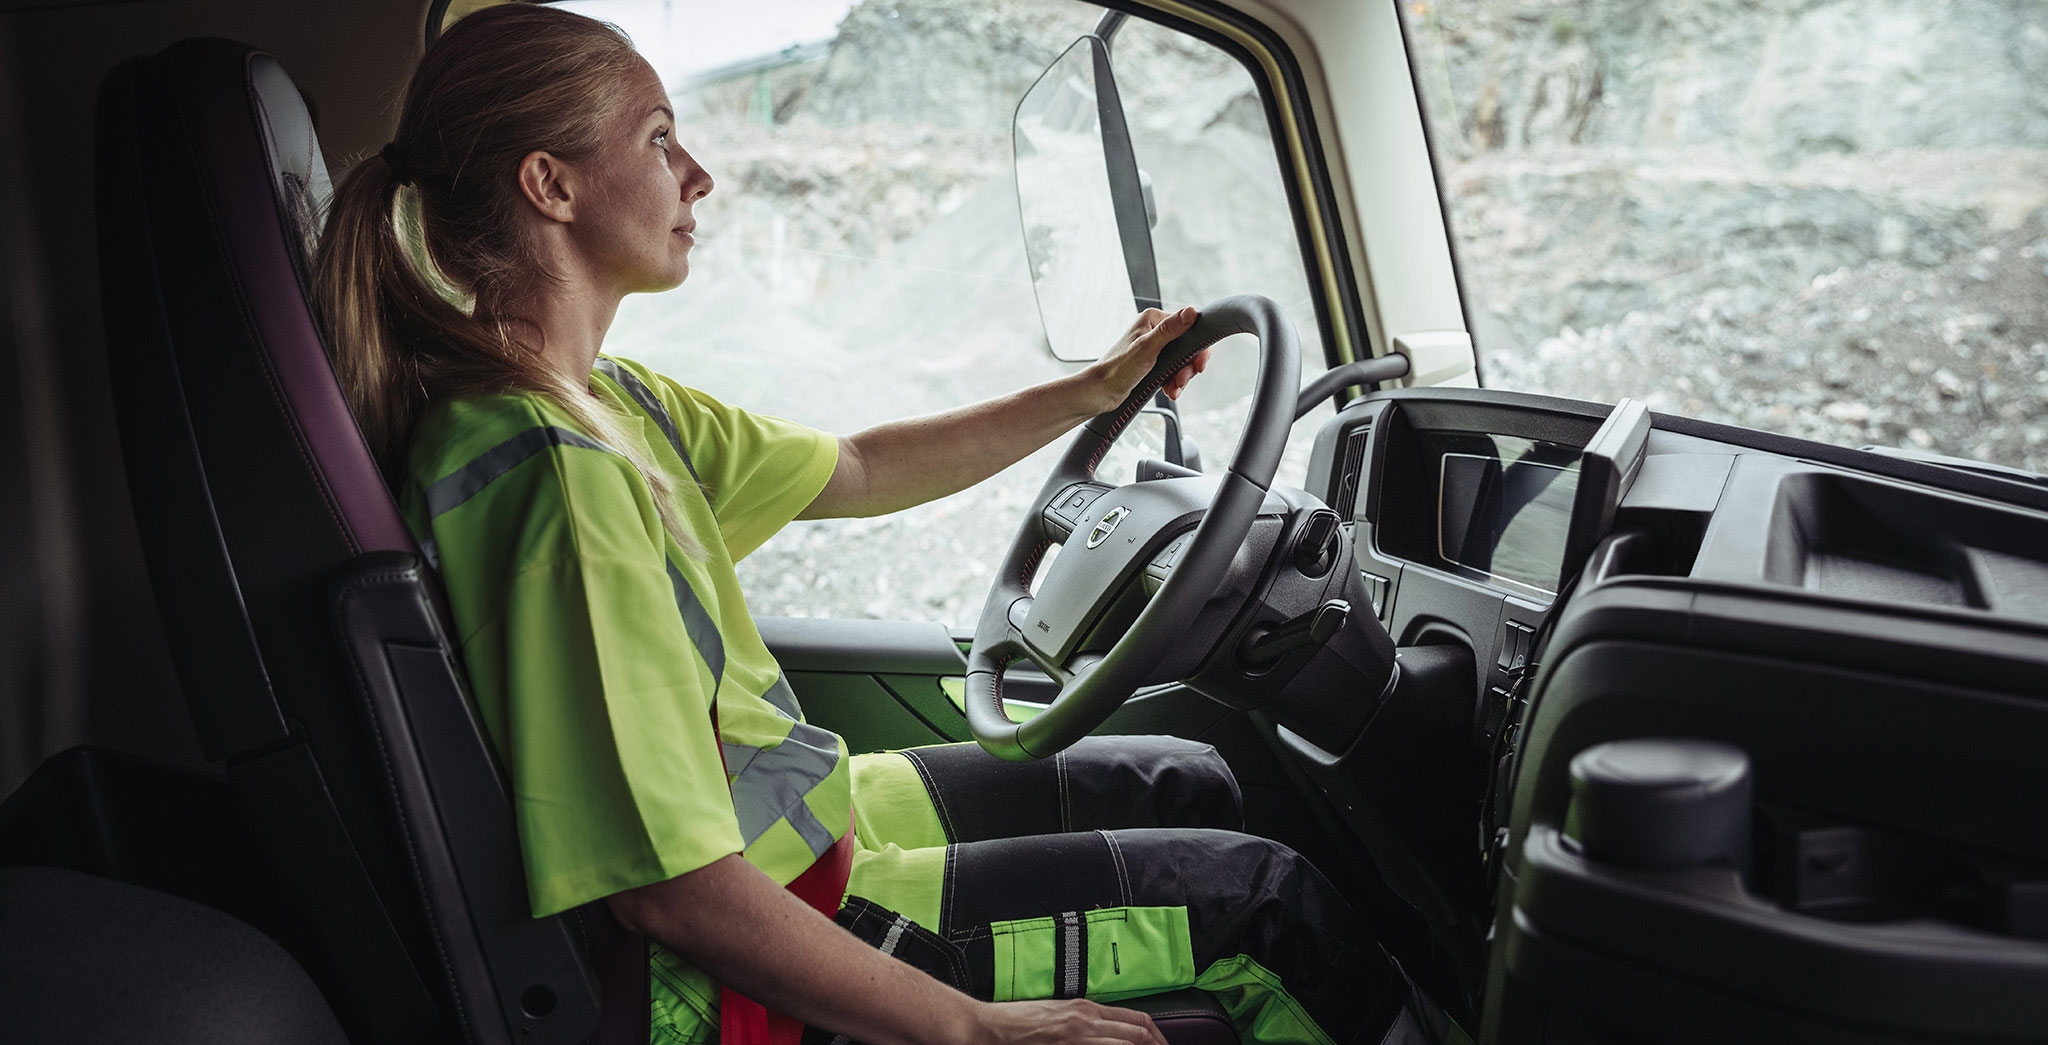 Top strategies for retaining truck drivers in 2023